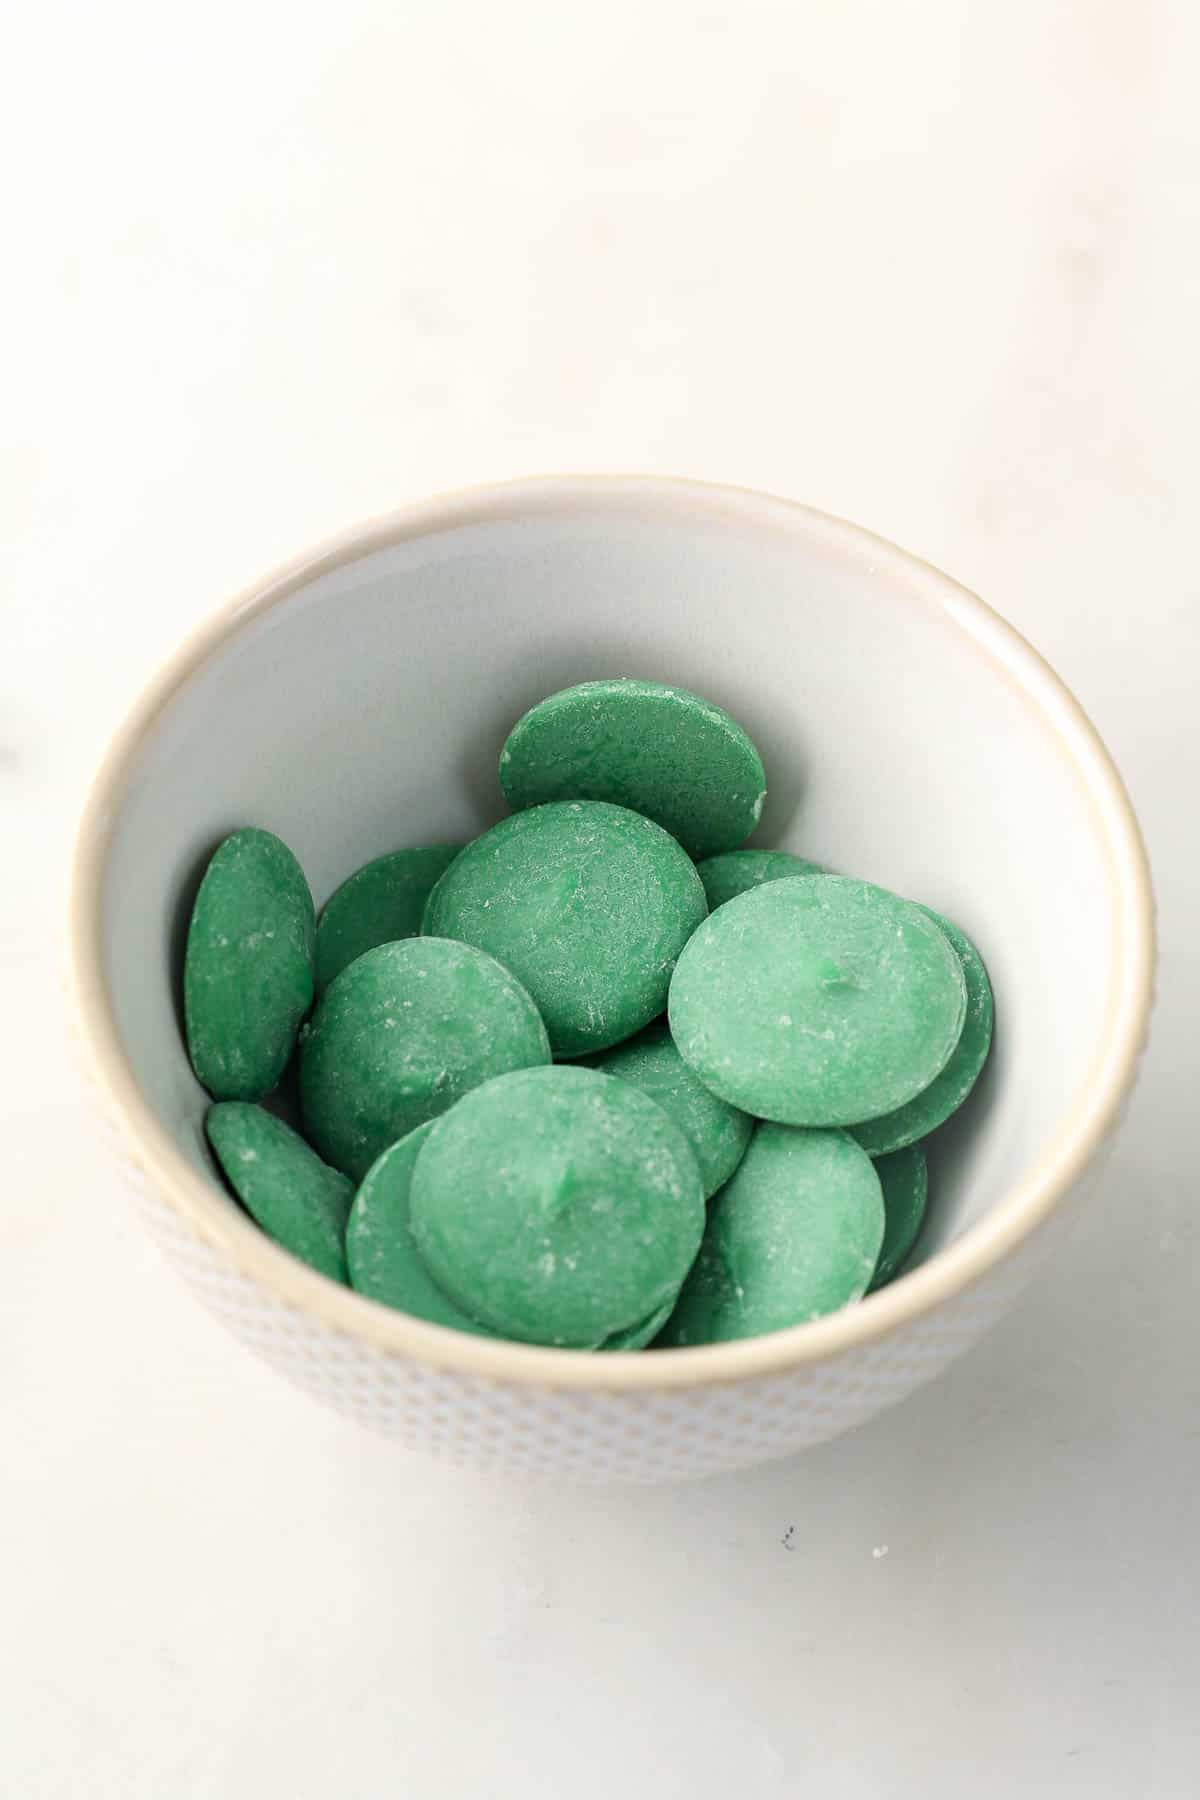 Green candy melts in a white bowl.